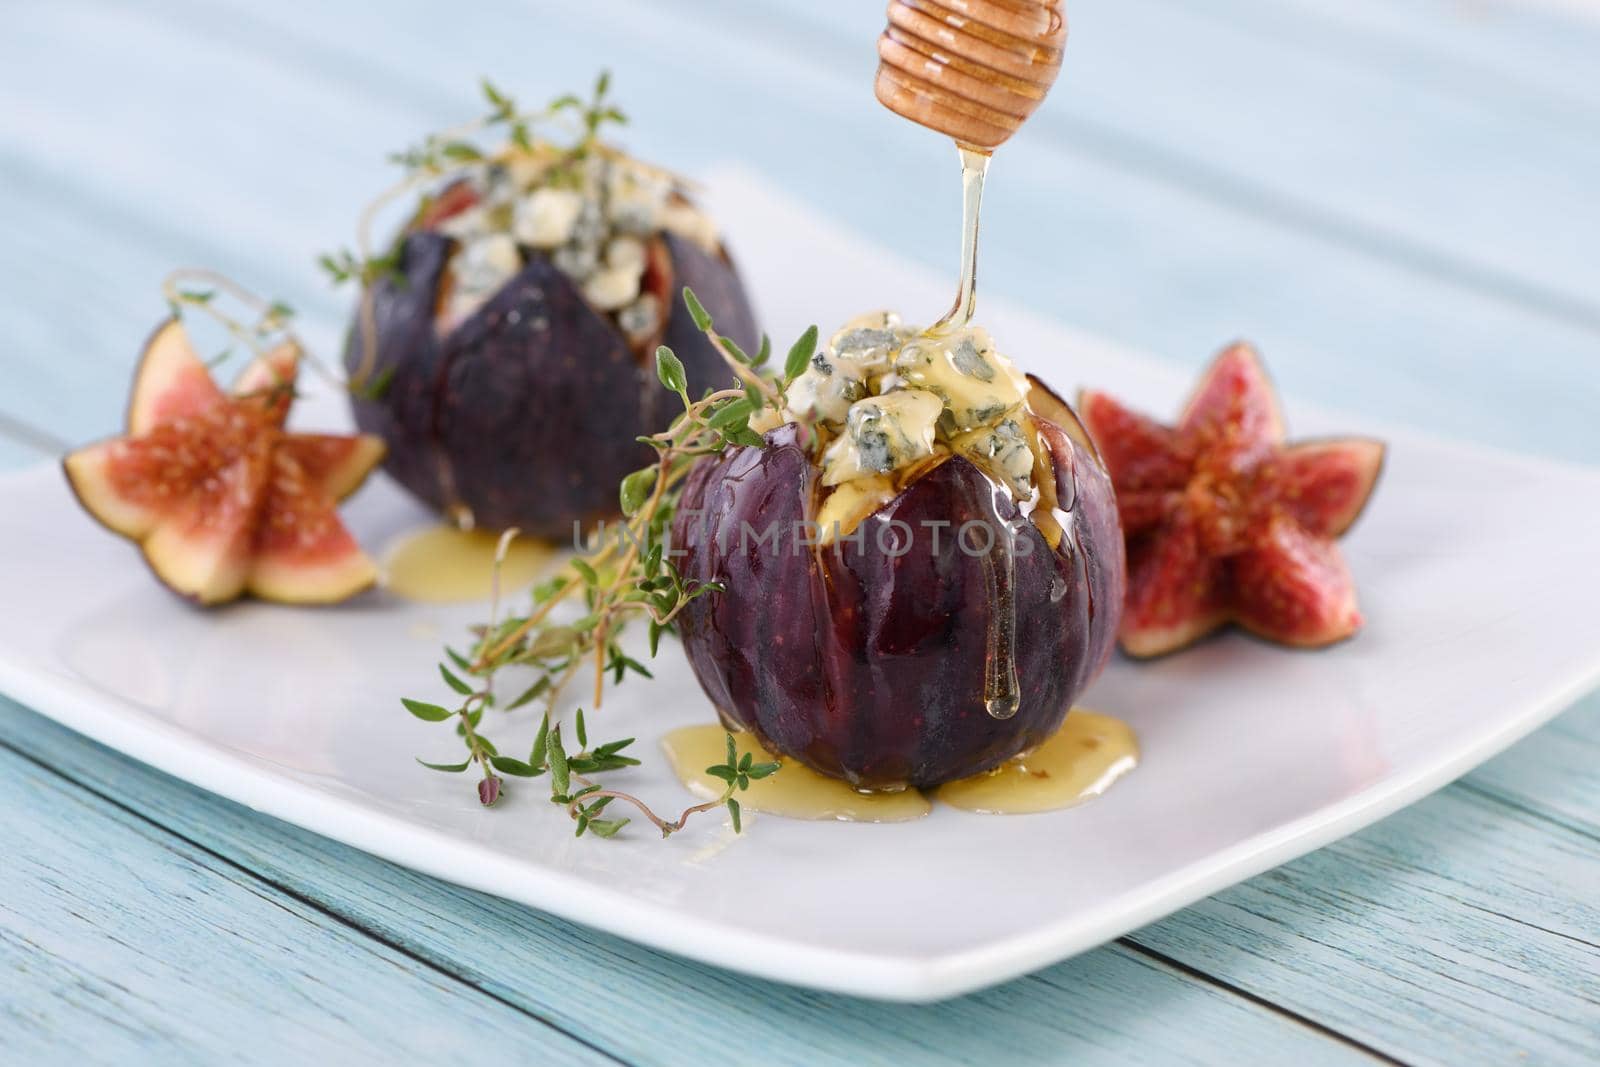 Figs stuffed with blue cheese by Apolonia